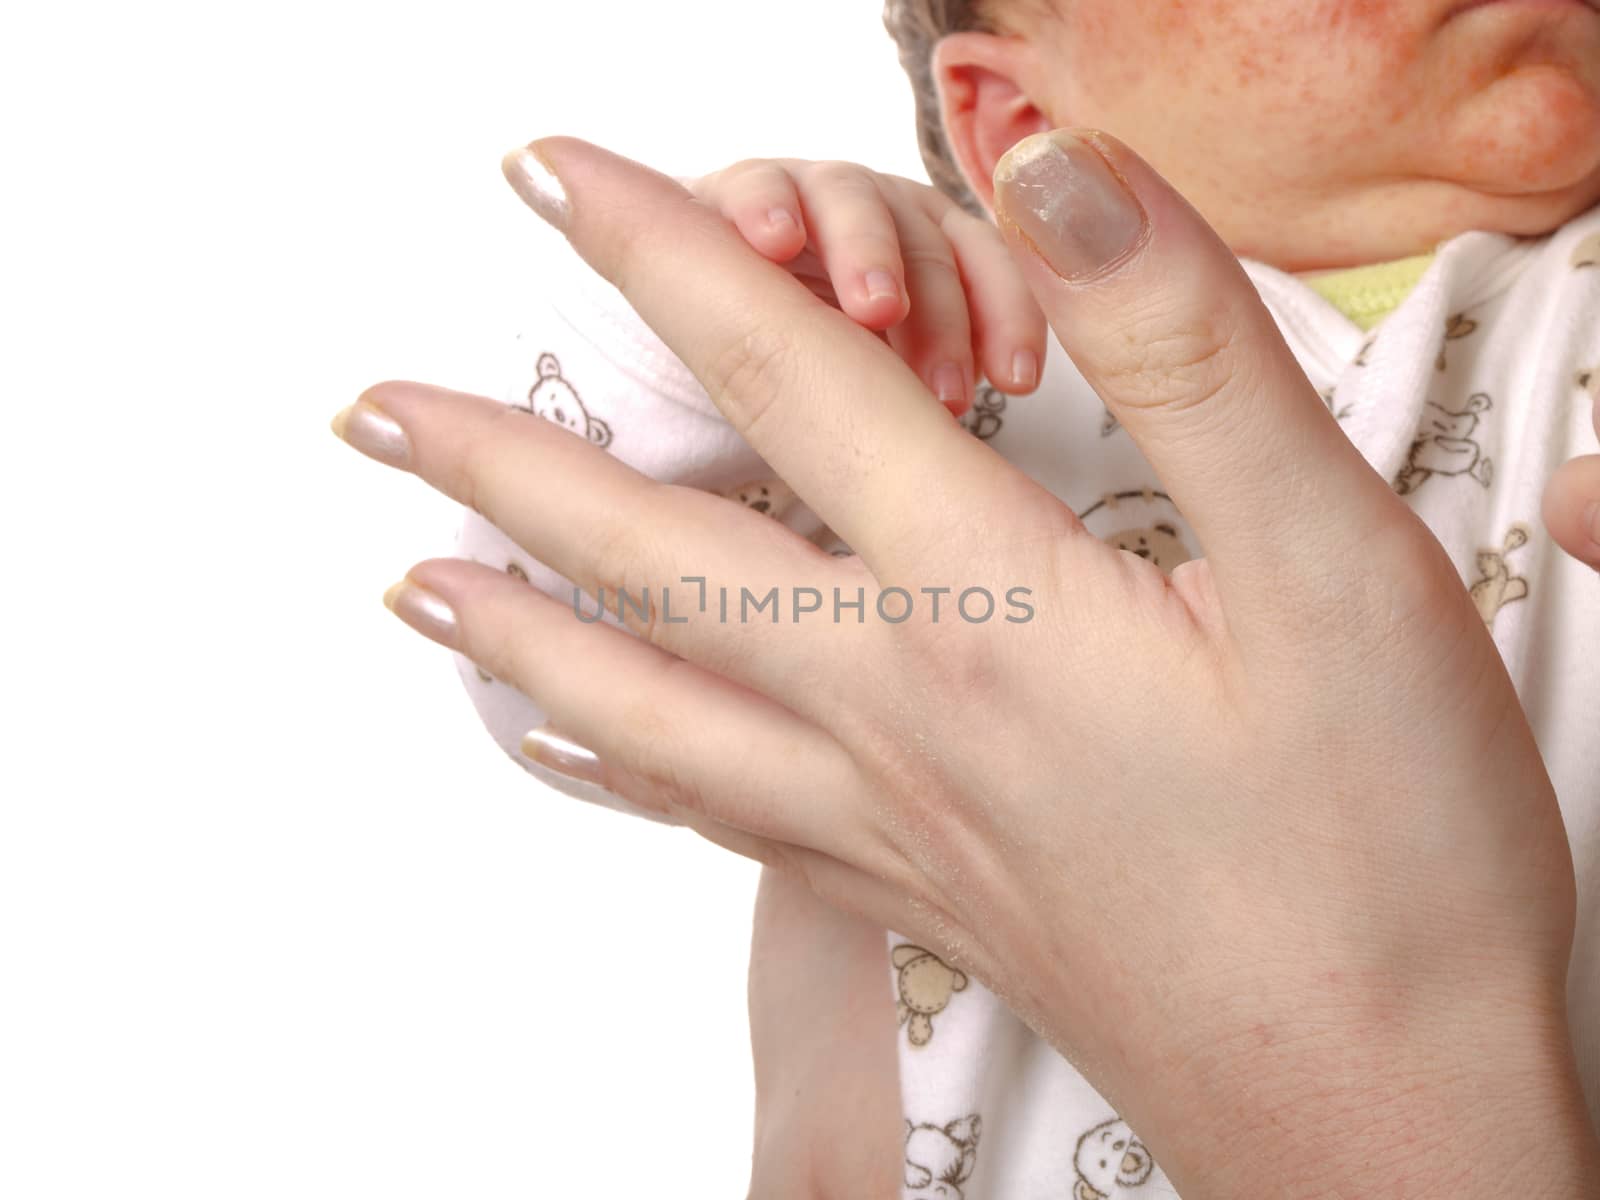 Mother playing with newborn baby, holding hands, towards white